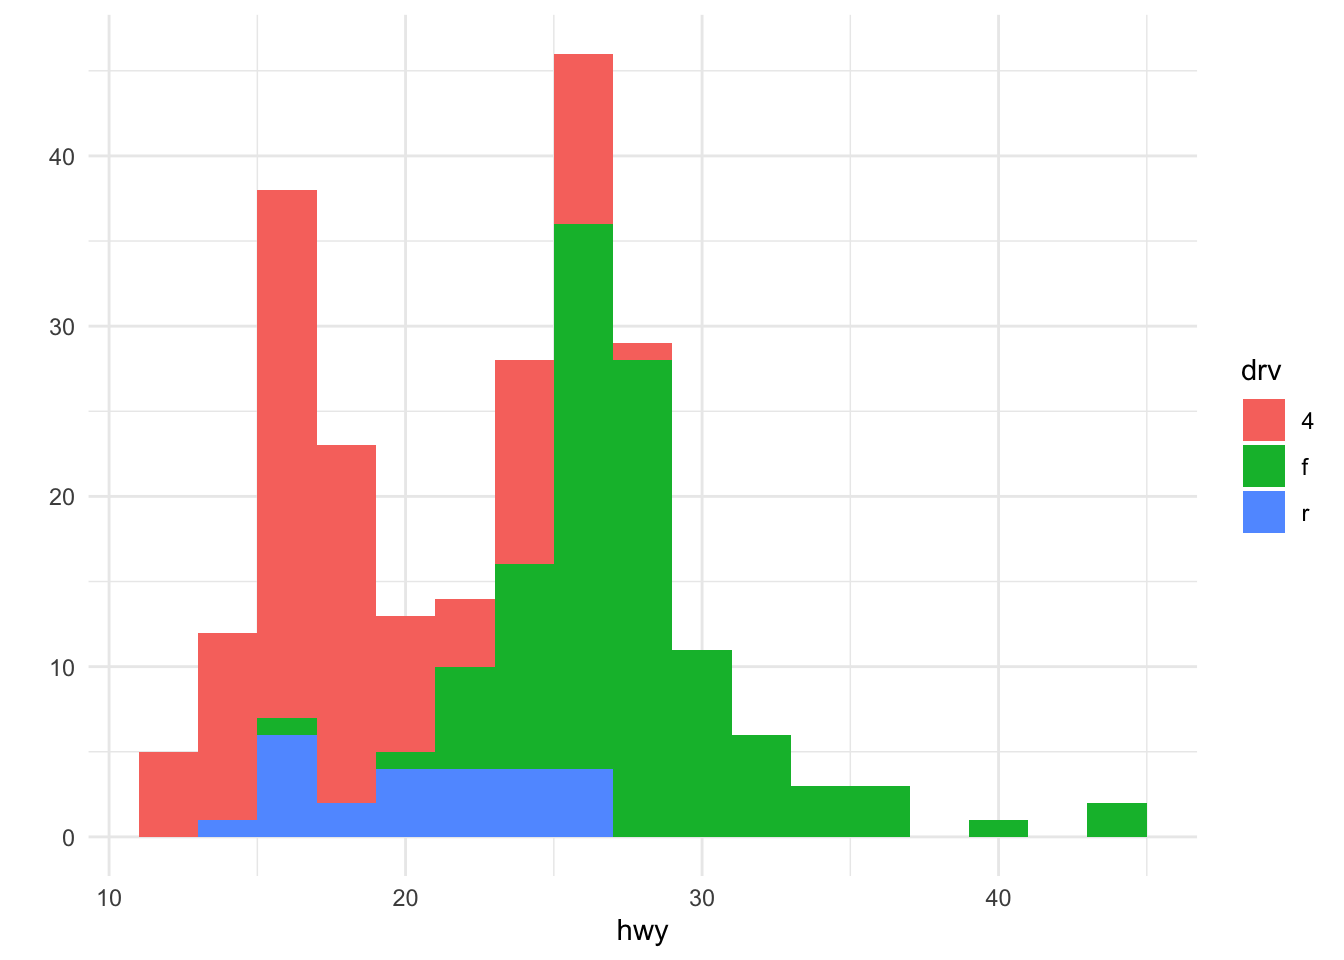 Histogram of highway mileage by drive class